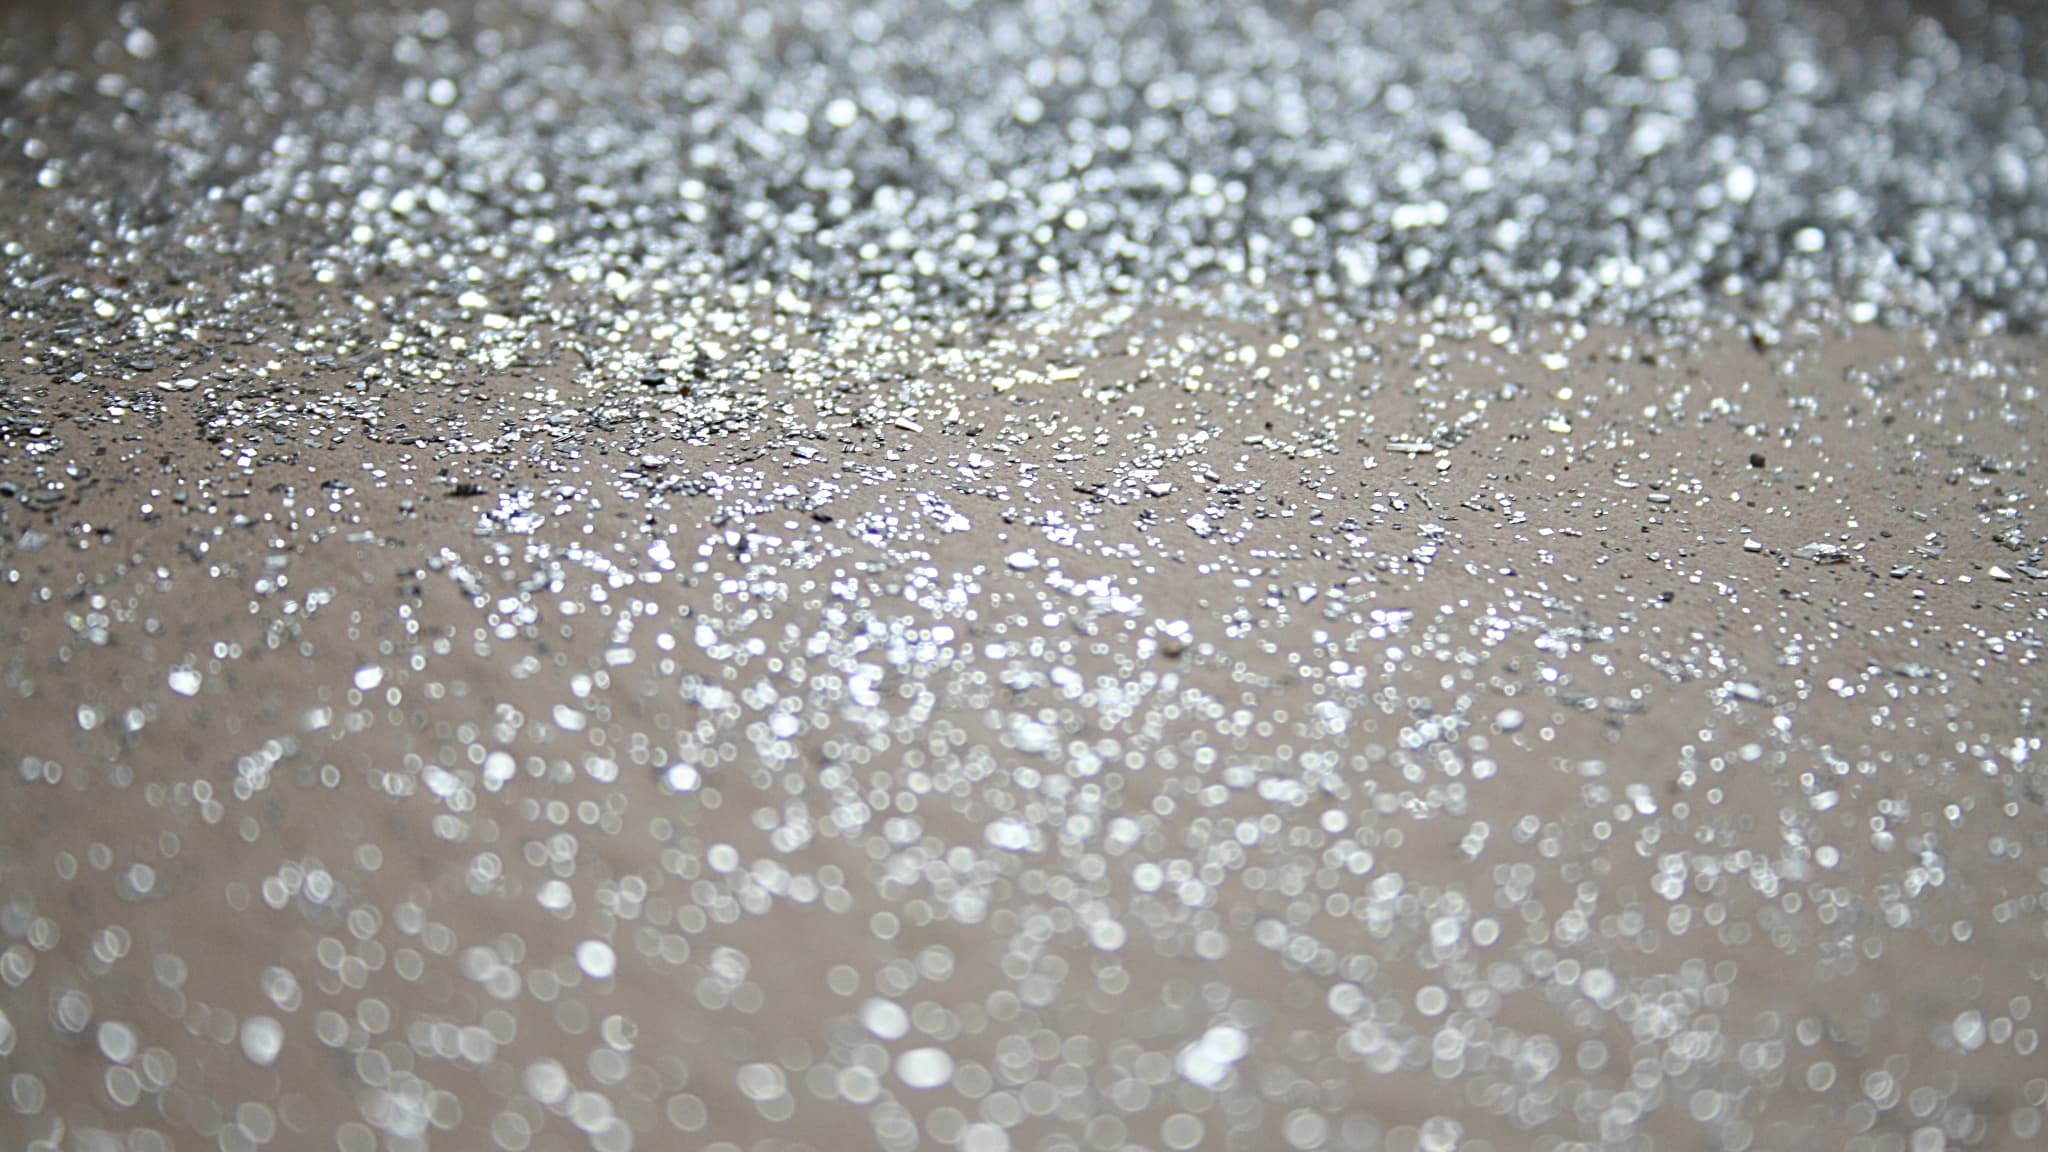 Glitter is banned in some schools for ecological reasons.